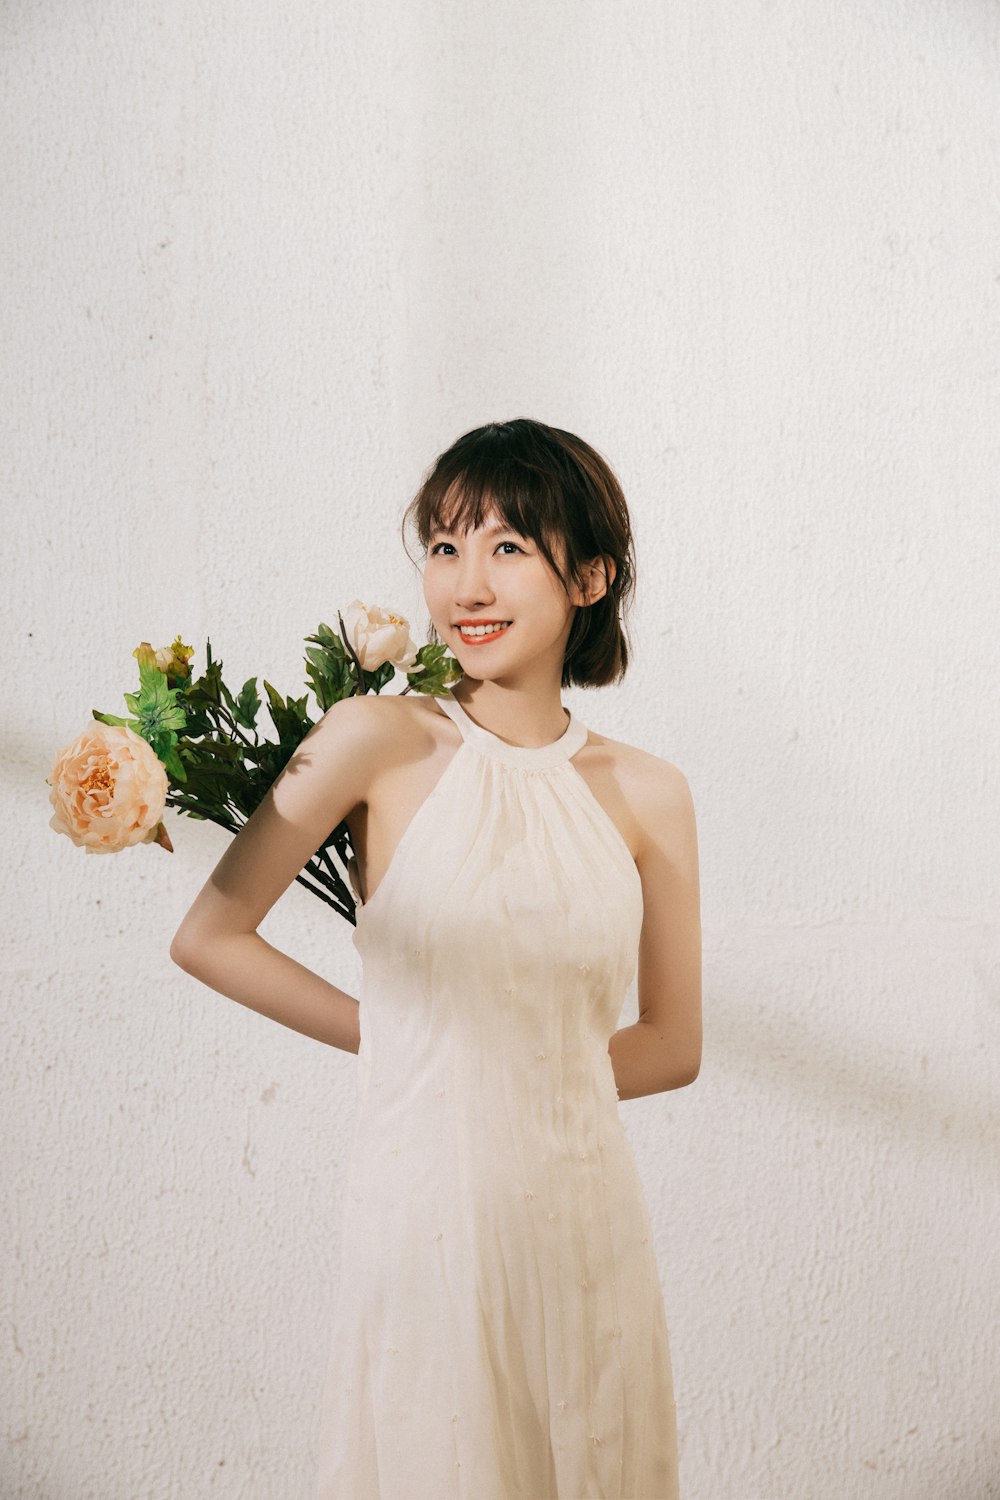 woman in white sleeveless dress holding bouquet of flowers